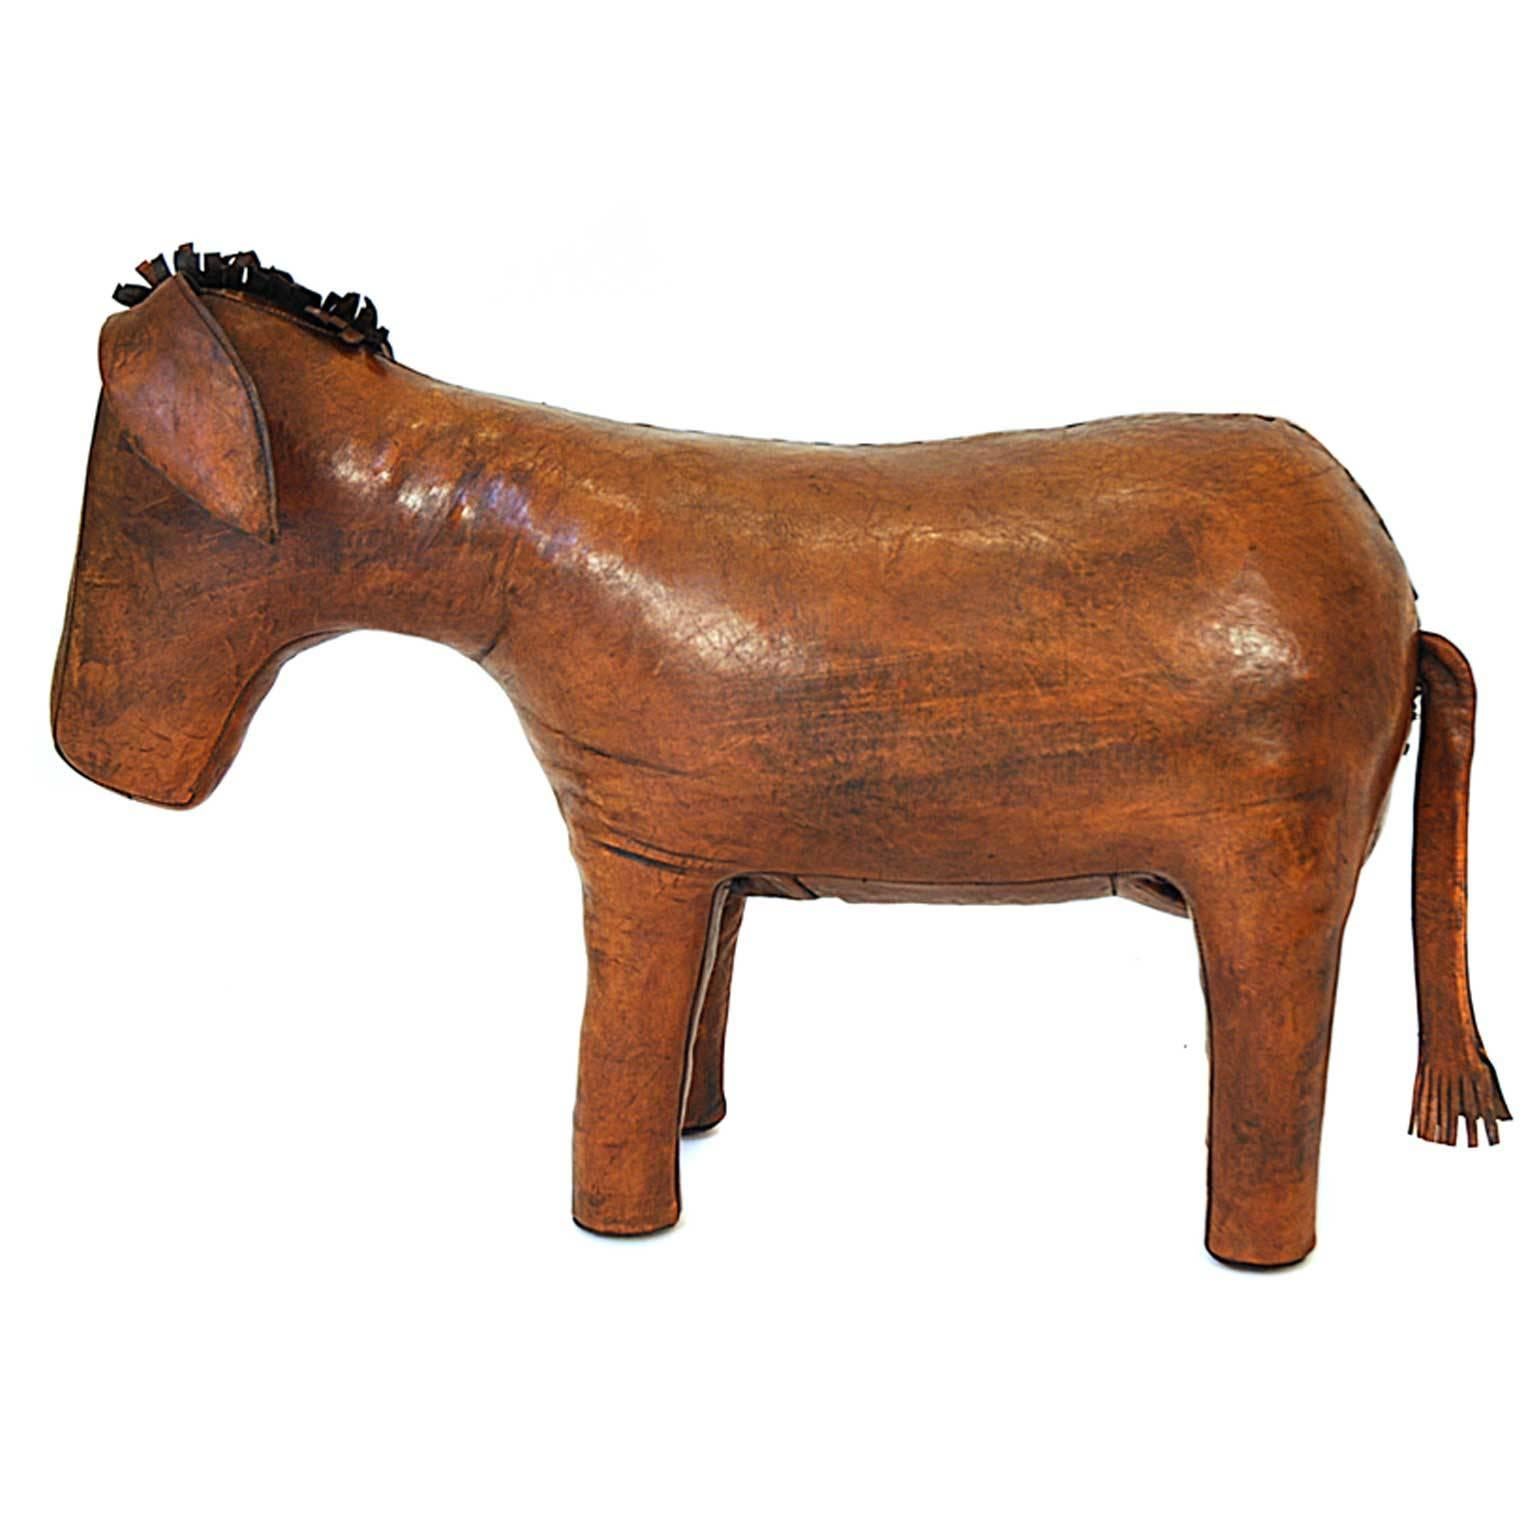 This piece was designed by Dimitri Omersa in 1960s (England). The donkey stool is made of cowhide leather with a metal construction inside and it is filled with hay. The series of stools representing various animals was marketed by Abercrombie and